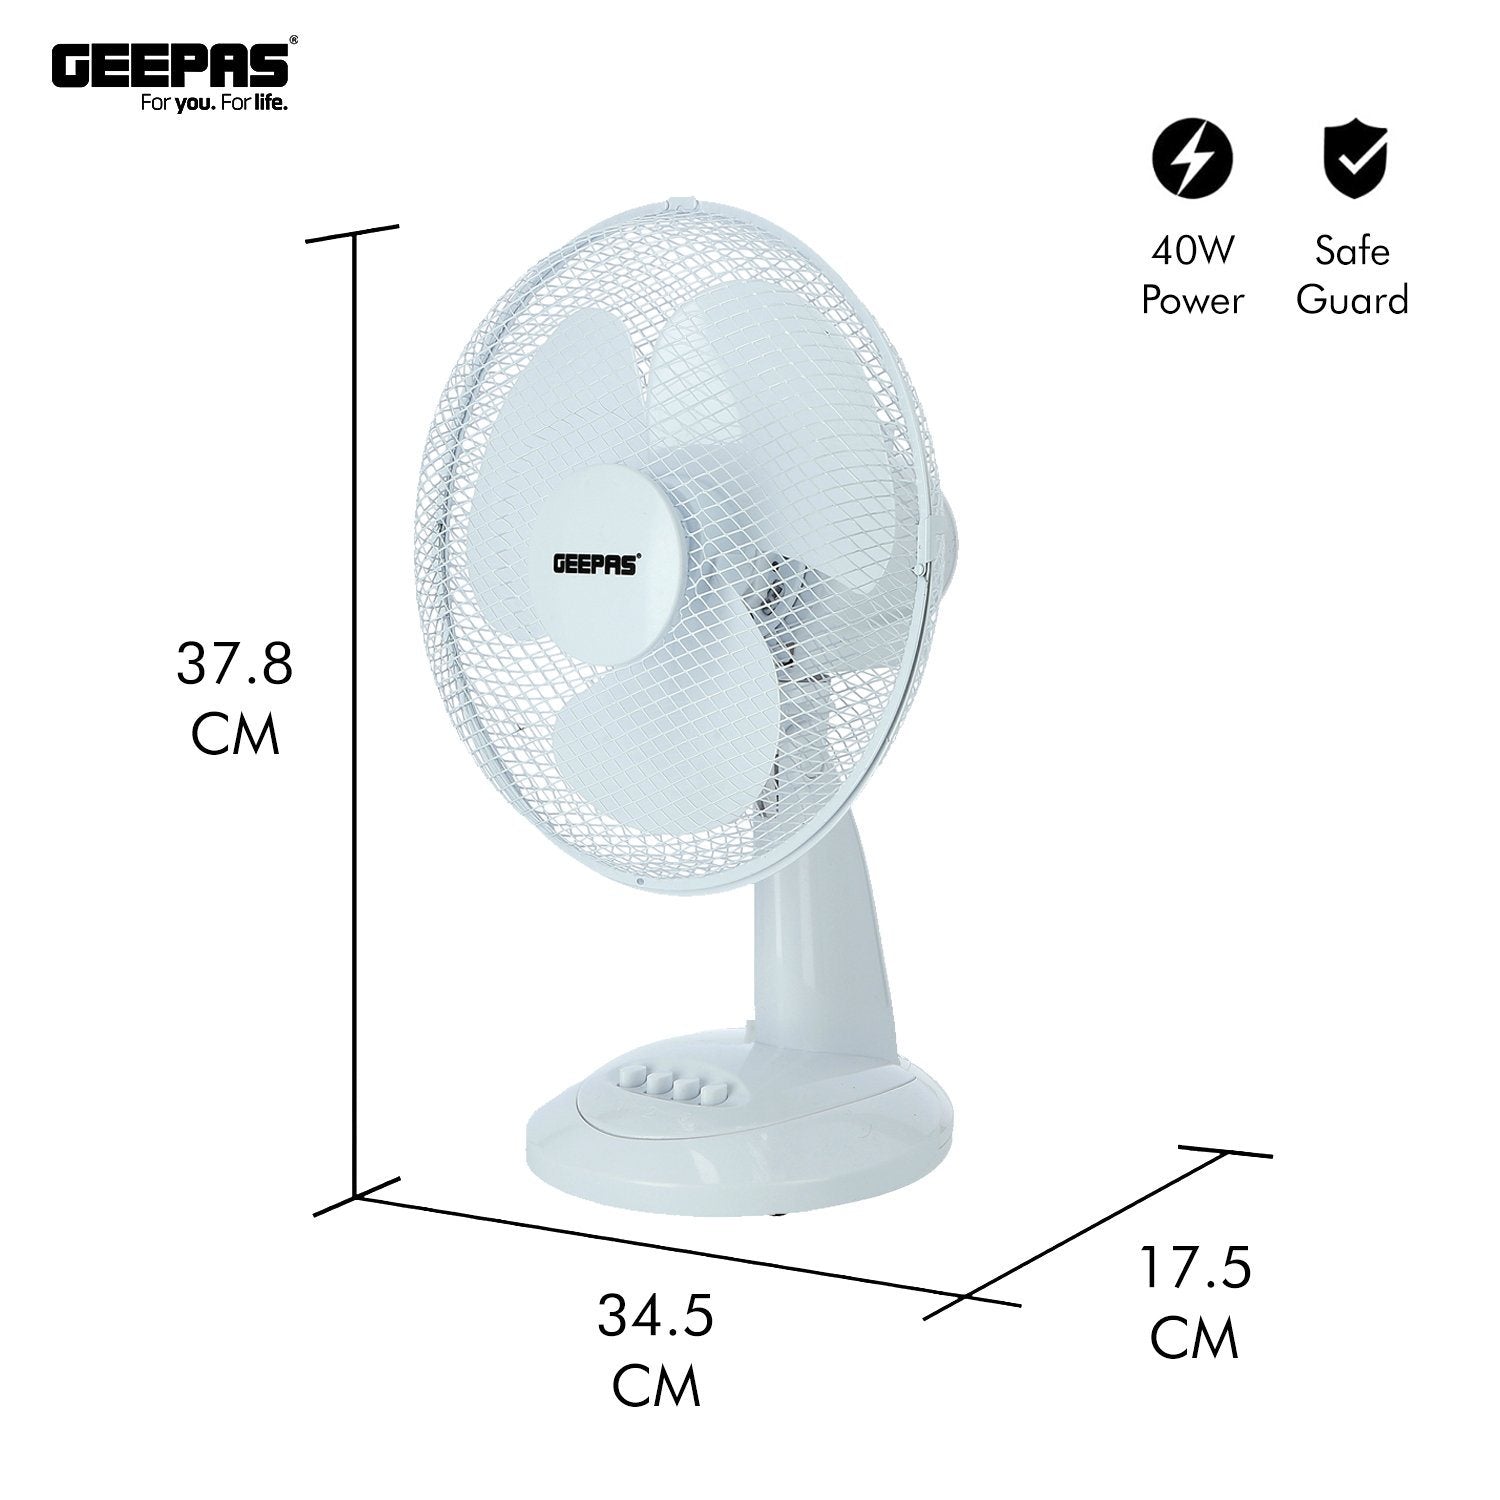 This image shows of the sizing of the white cooling fan which is 37.8cm x 24.5cm x 17.5cm